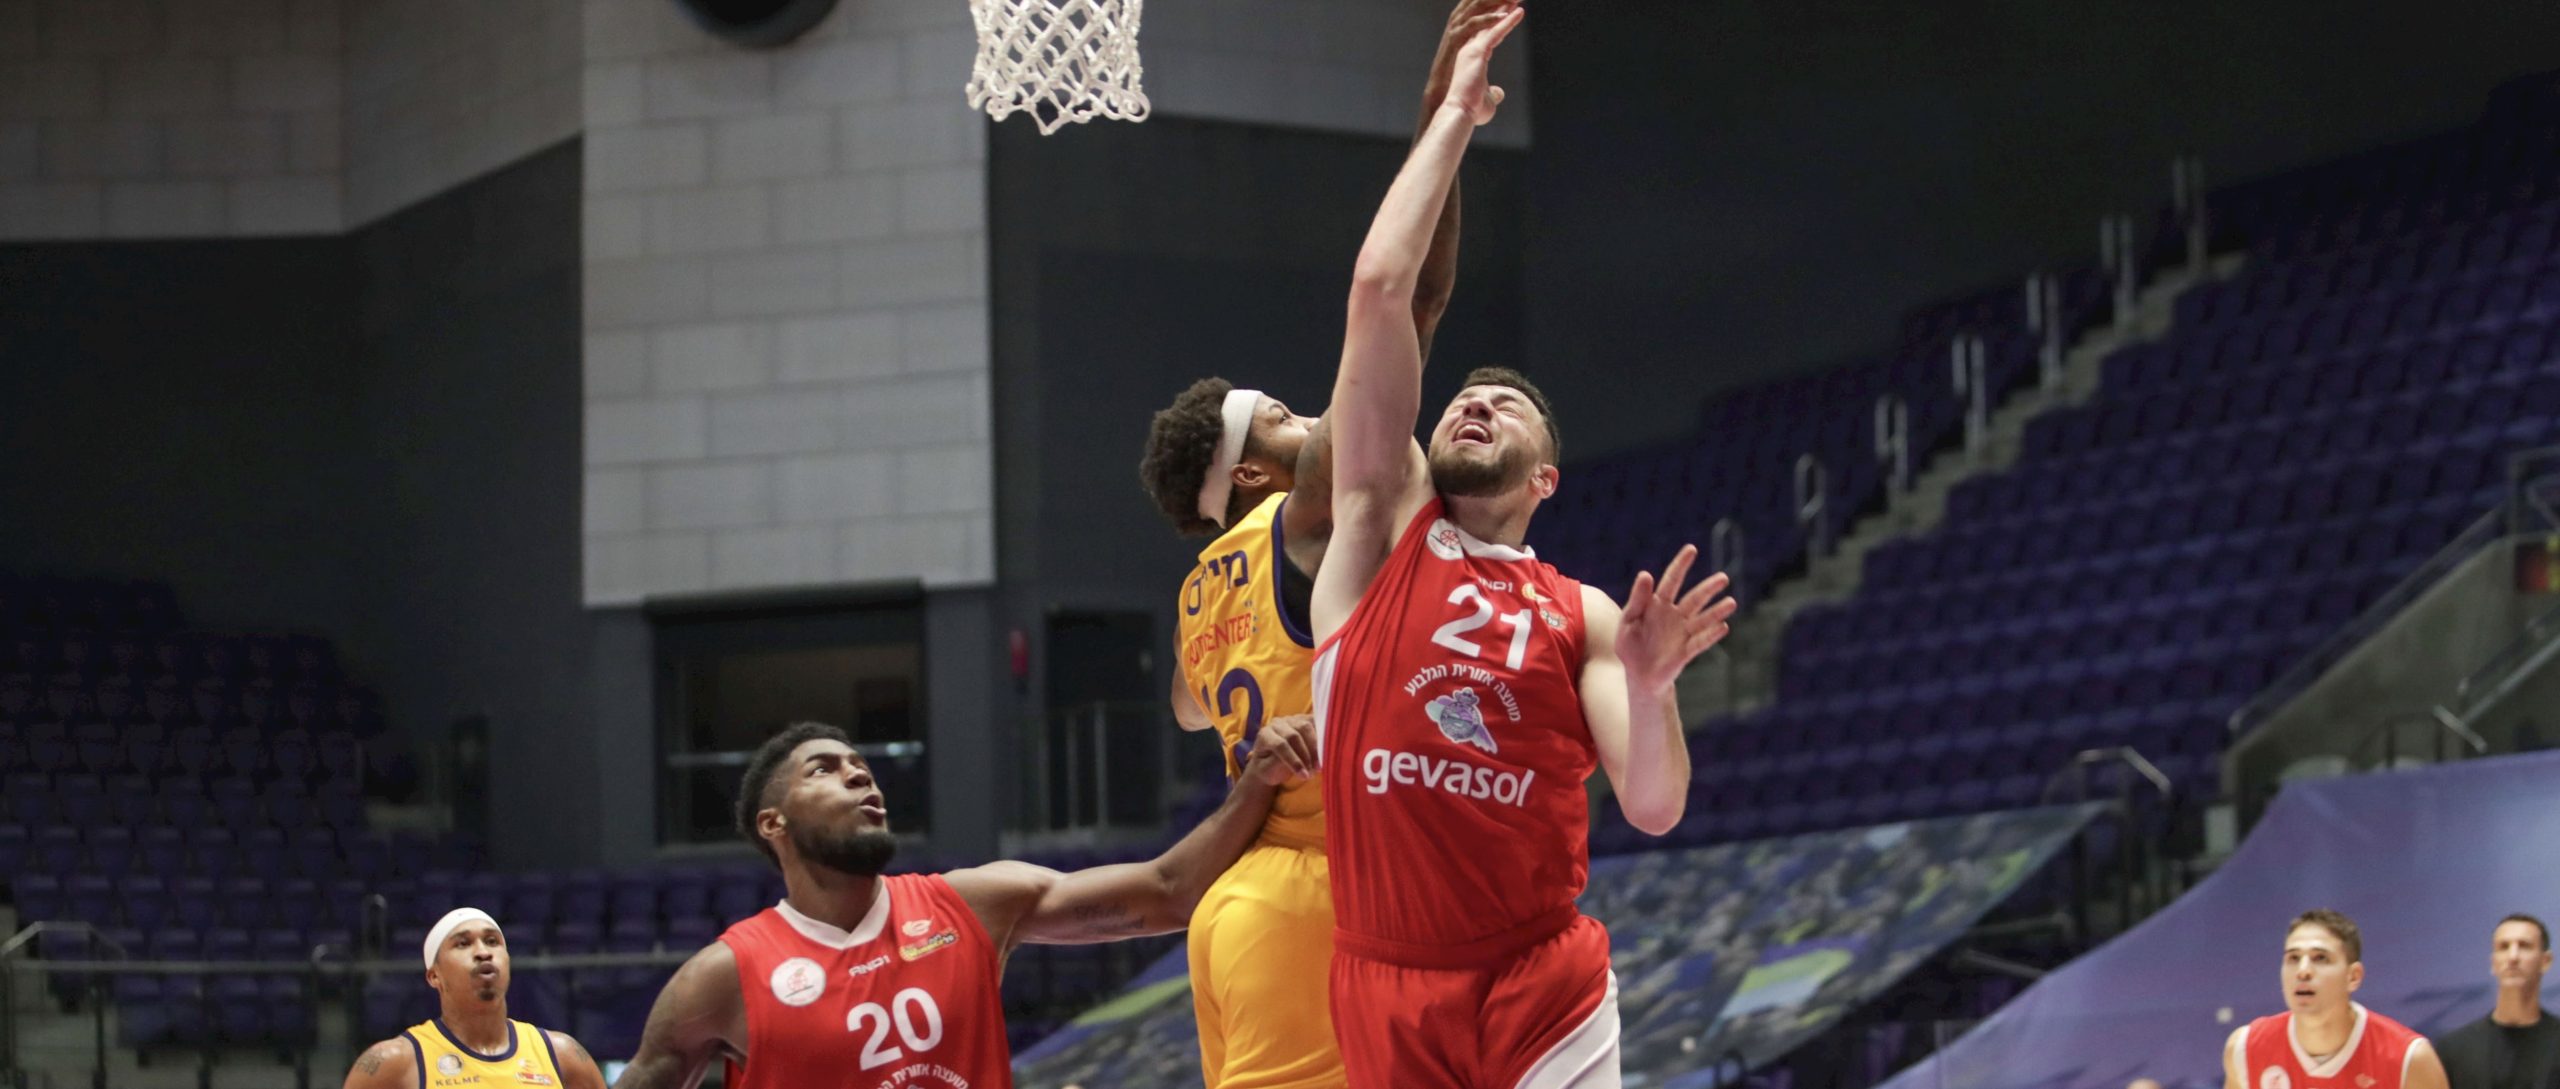 “Our chemistry is crazy” Netanel Artzi explains the secret to Gilboa’s early success. 3-Pointers: Analysis wrapping up Gilboa’s win over Holon!